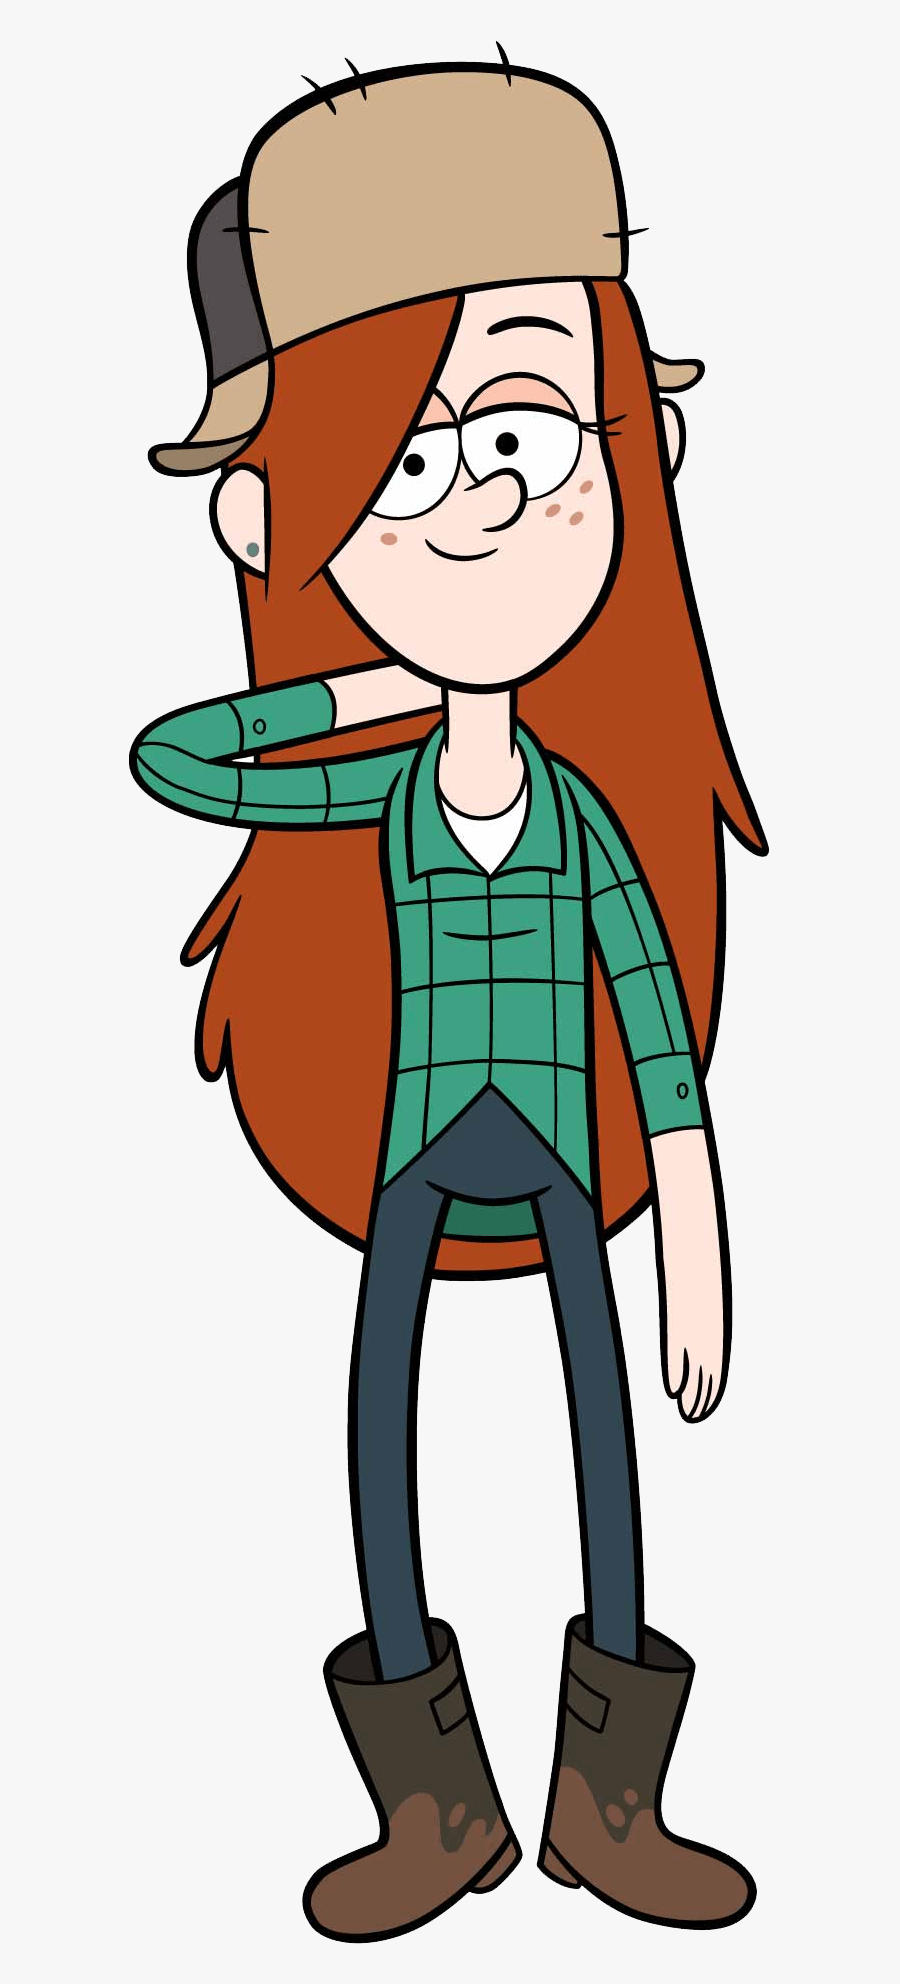 Gravity Falls Character Wendy Corduroy - Wendy Gravity Falls Png, Transparent Clipart